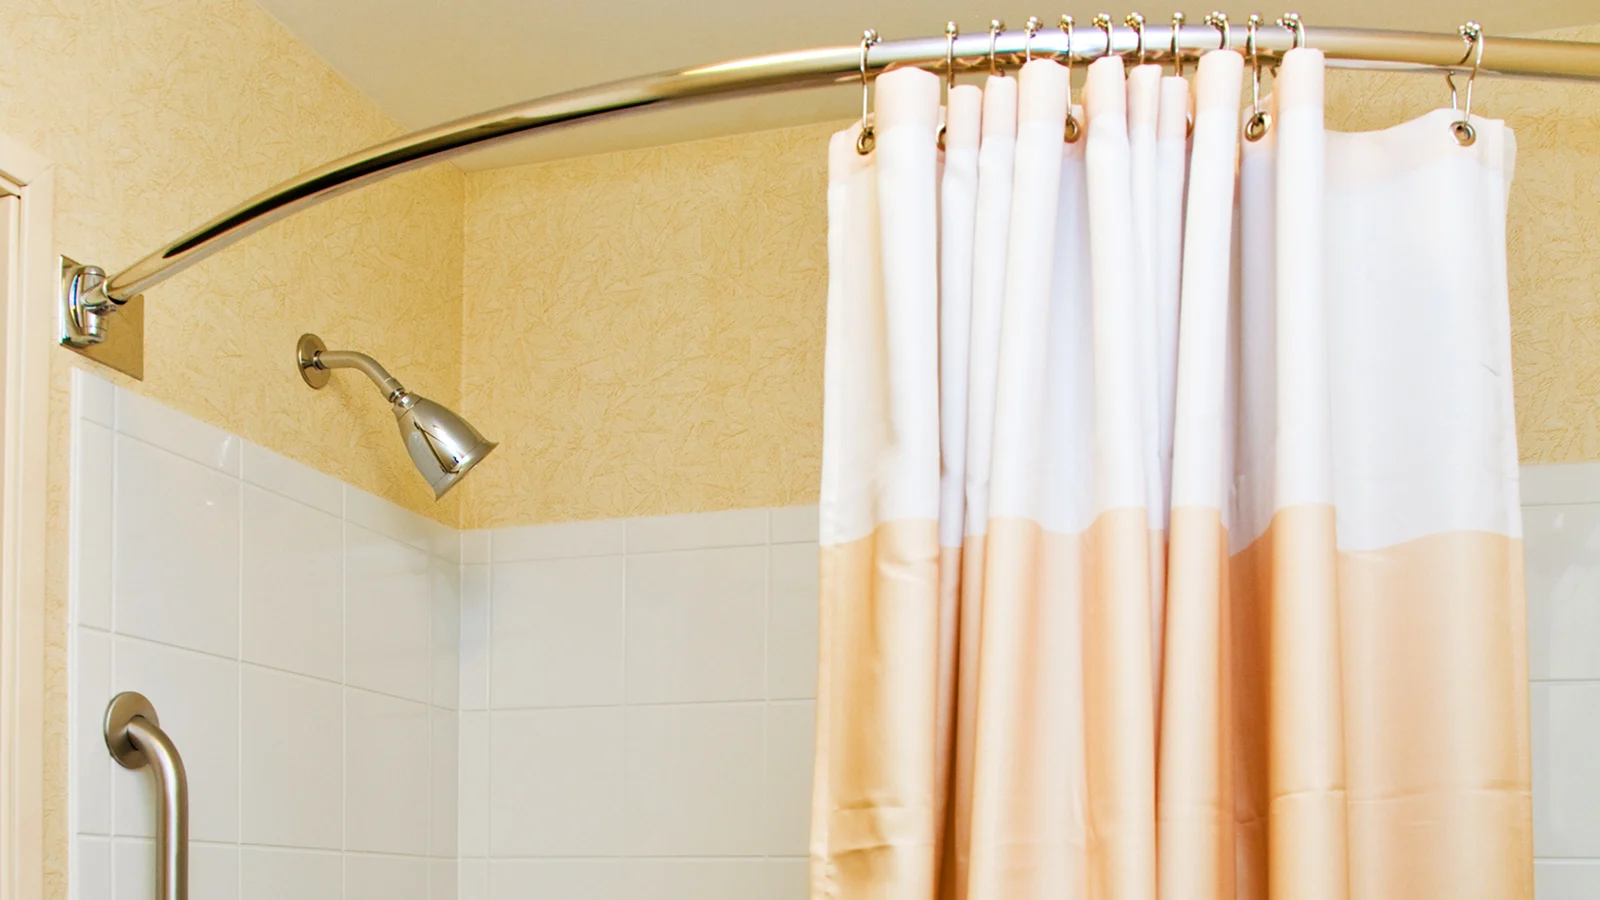 Learn how to keep a shower curtain closed in your bathroom.